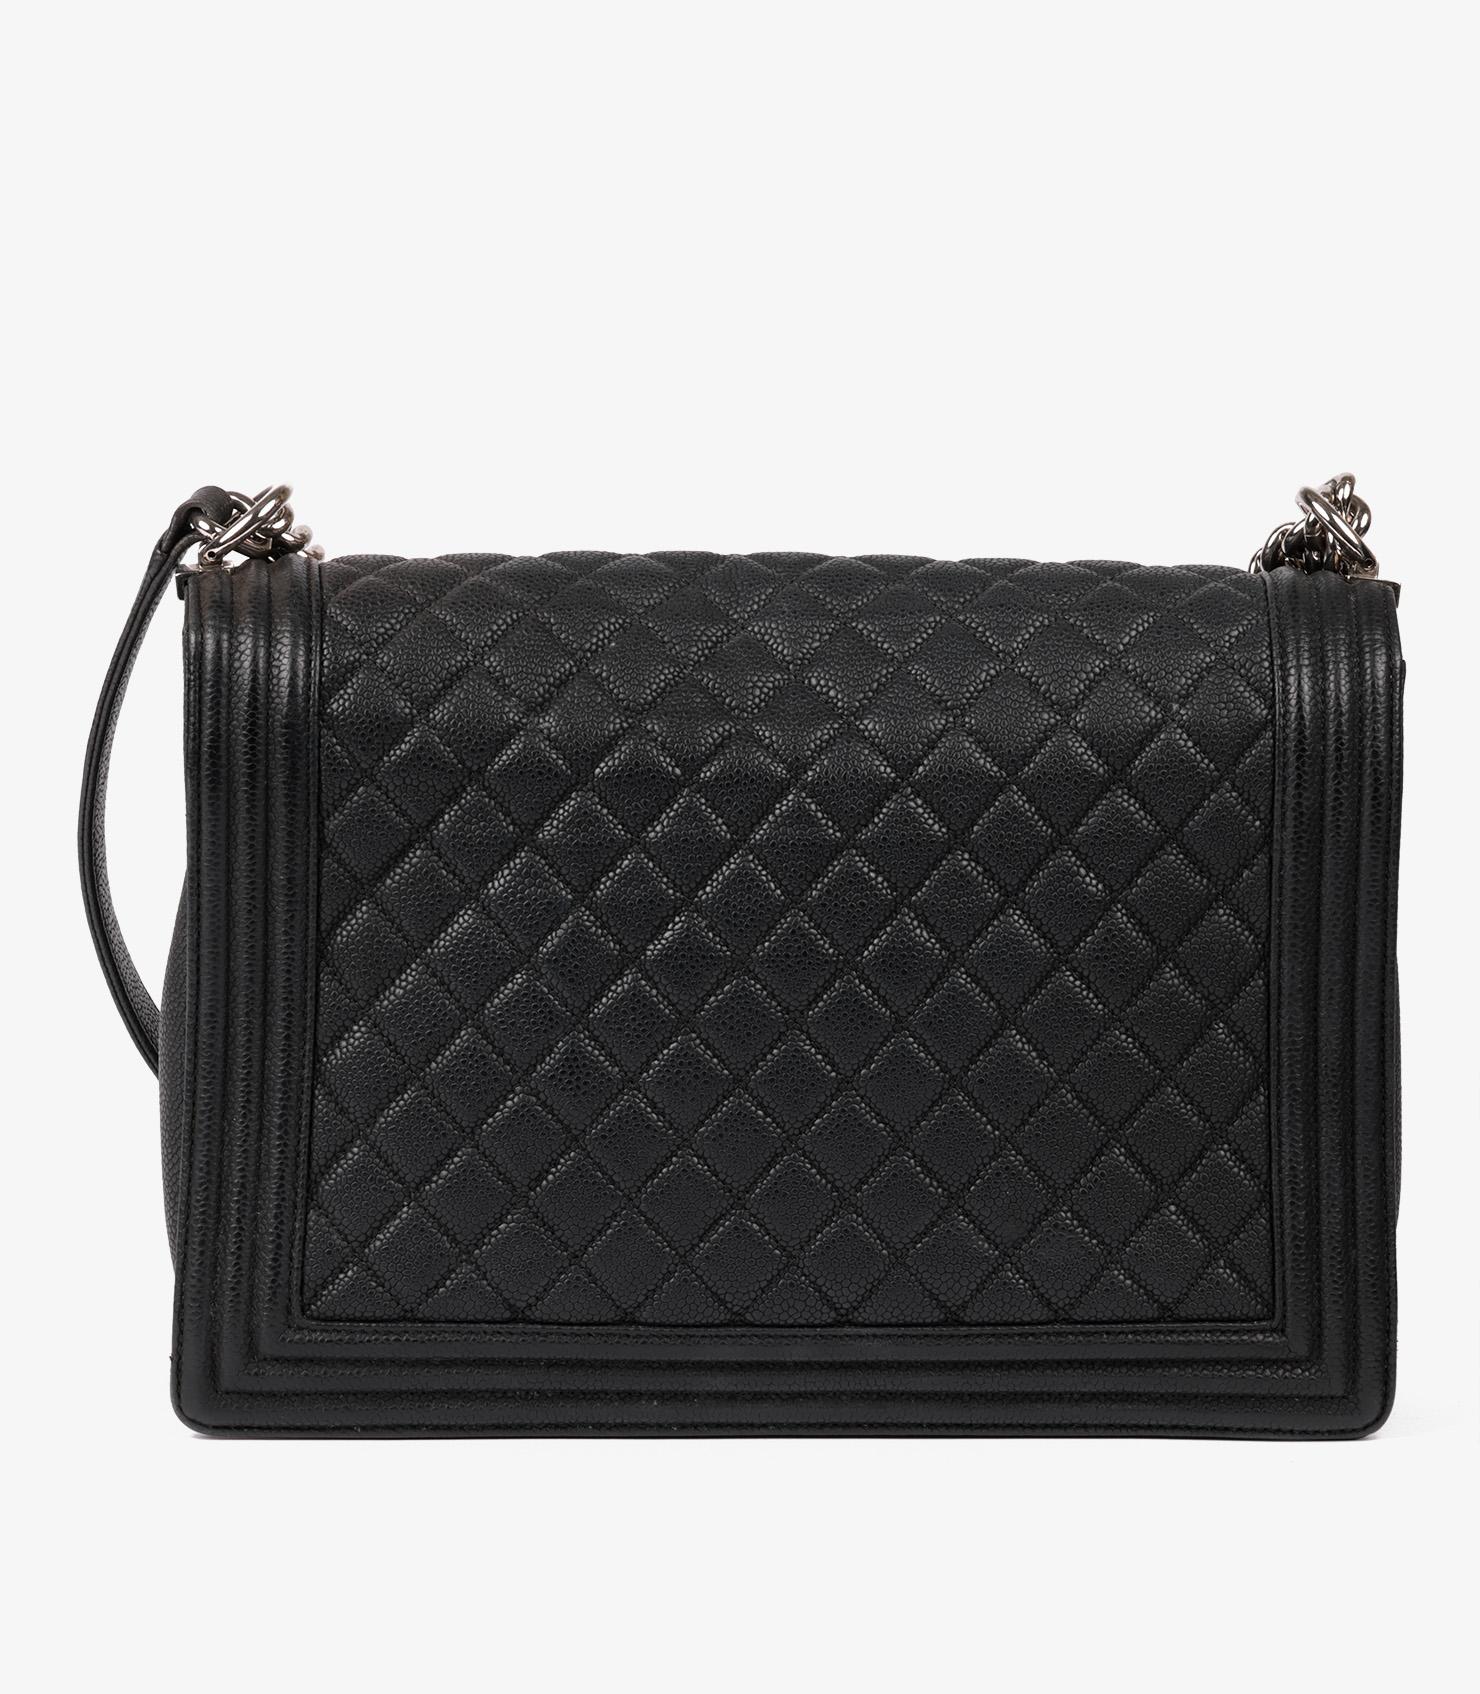 Chanel Black Quilted Caviar Leather Large Le Boy Bag For Sale 2